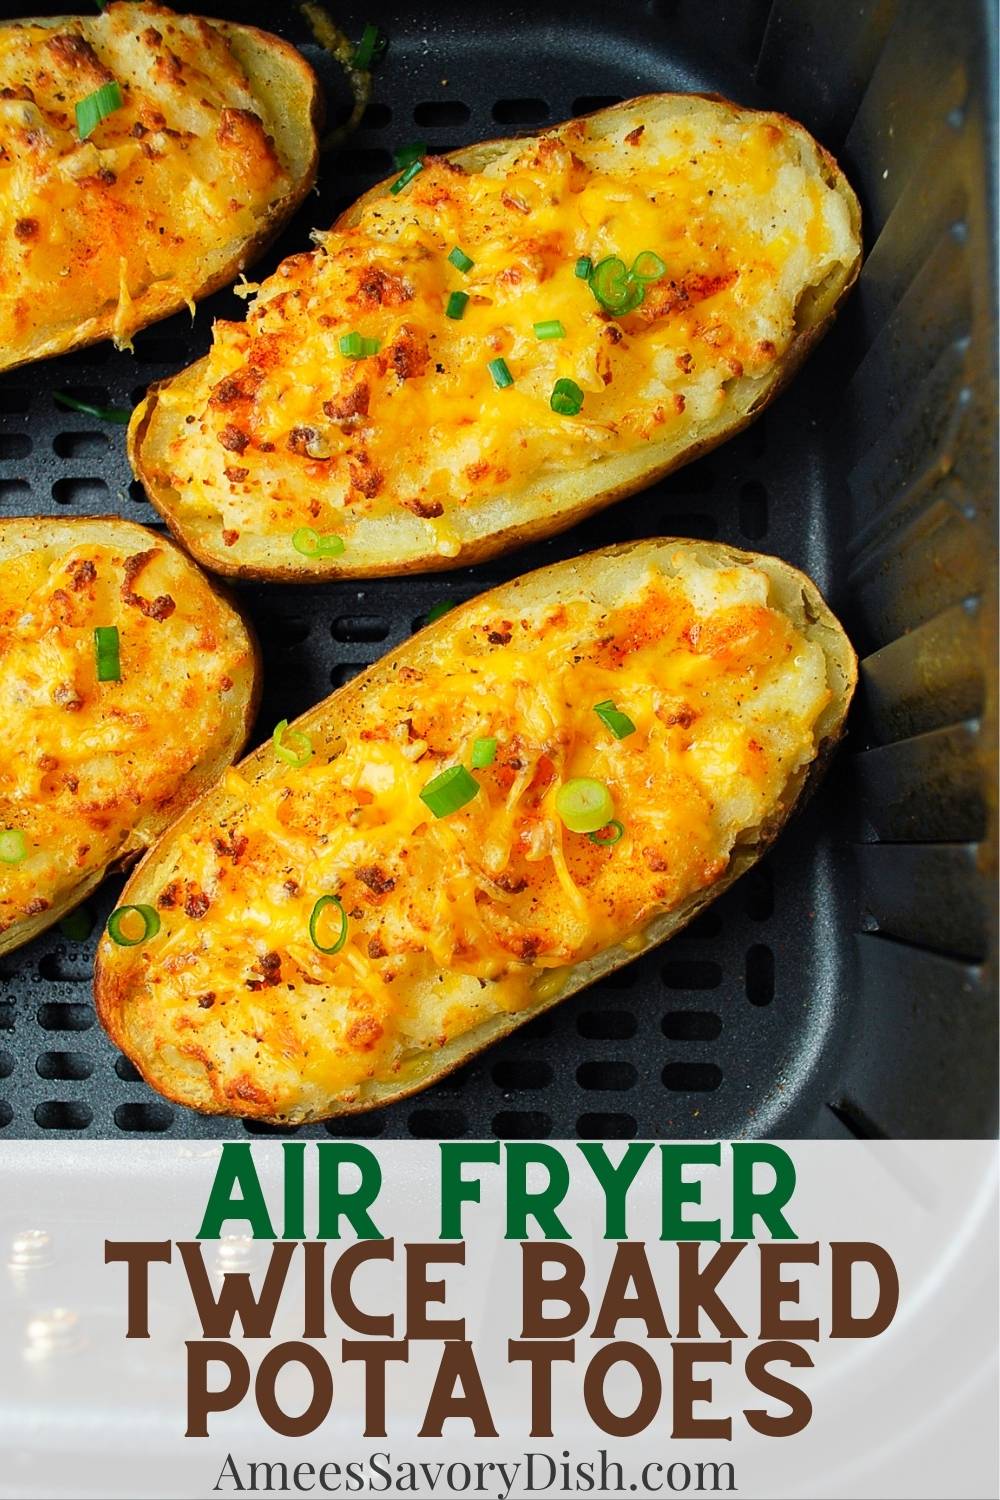 Lightened-up cheesy mashed potatoes to stuff into baked potato skins and then bake again in the air fryer. via @Ameessavorydish